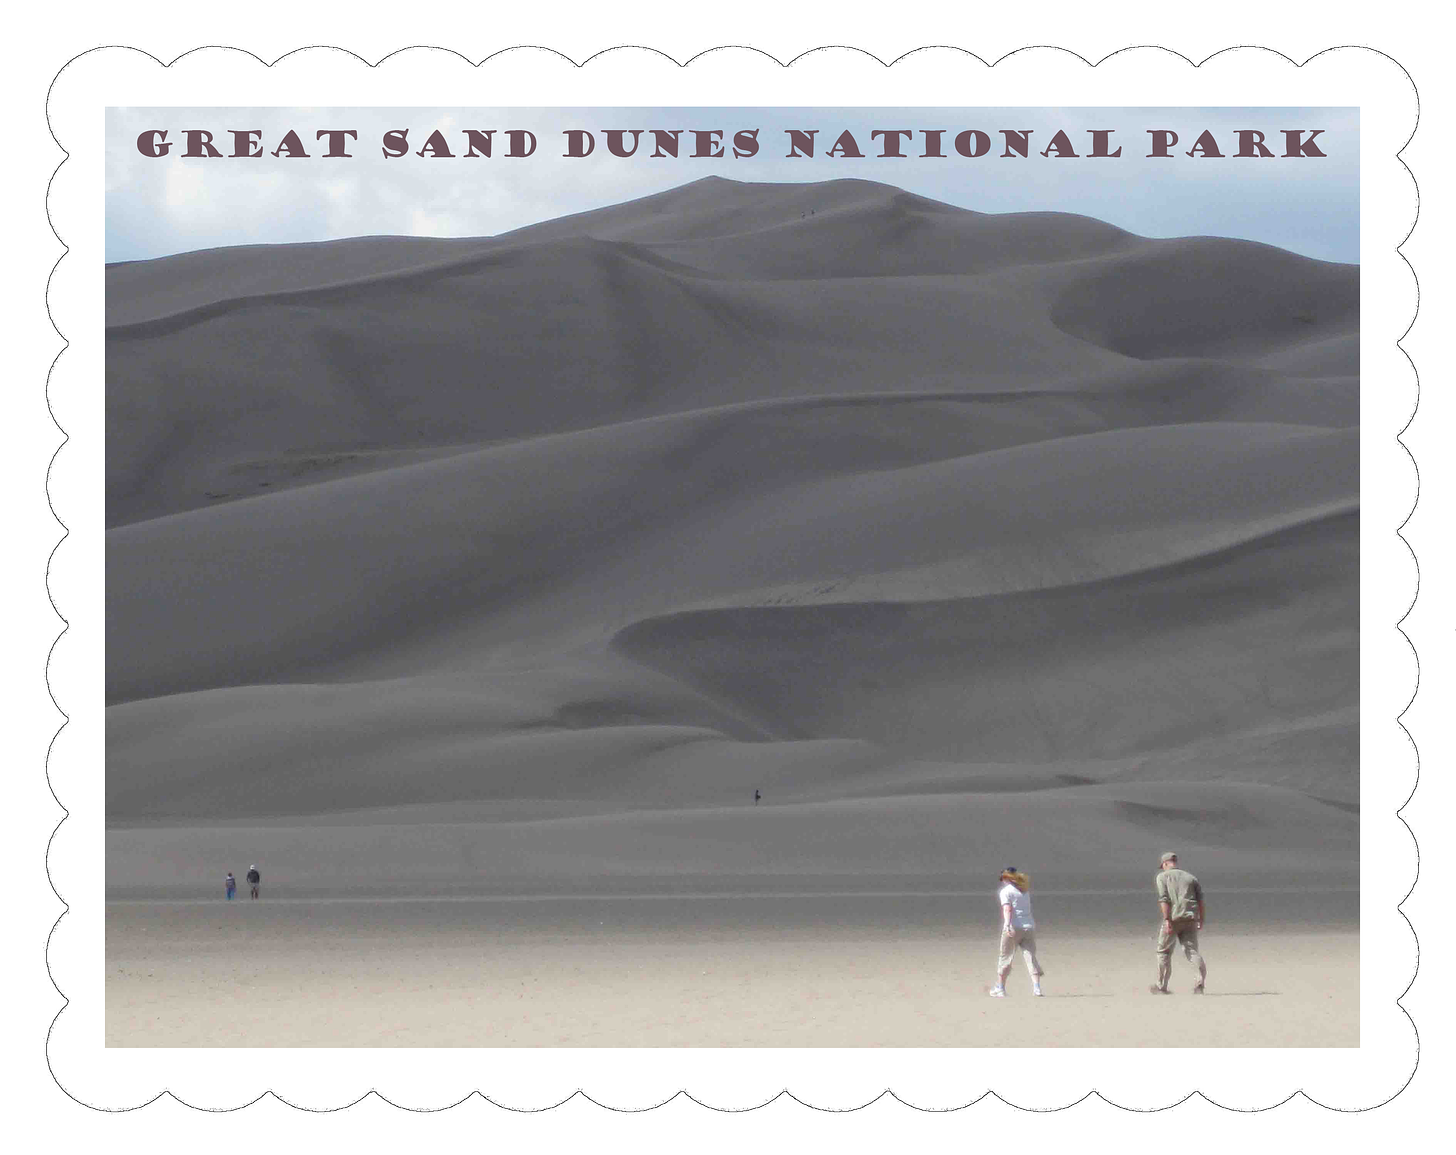 Great Sand Dunes National Park.  Photo of many layers of sand dunes with humans for scale in four different locations.  The people in the foreground are recognizable as a man and a woman.  The two near the top of the dune are a pair of black specks.